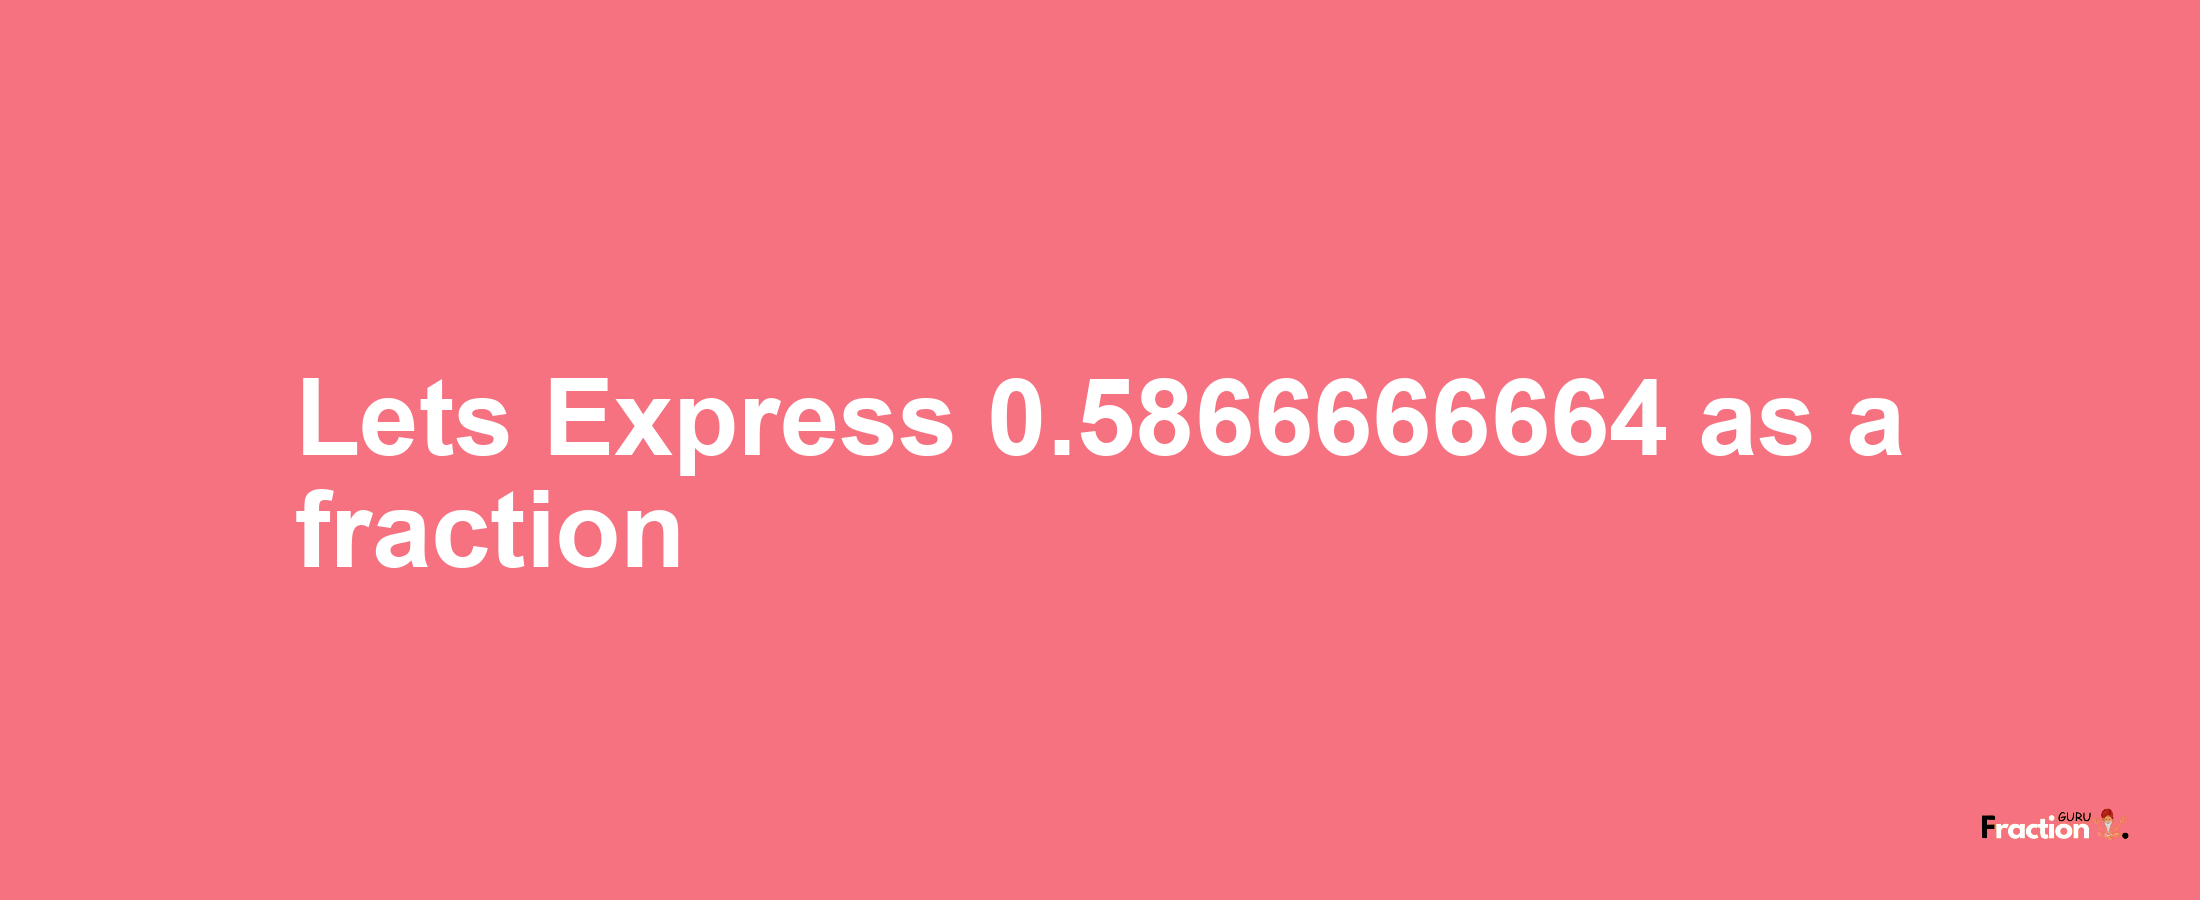 Lets Express 0.5866666664 as afraction